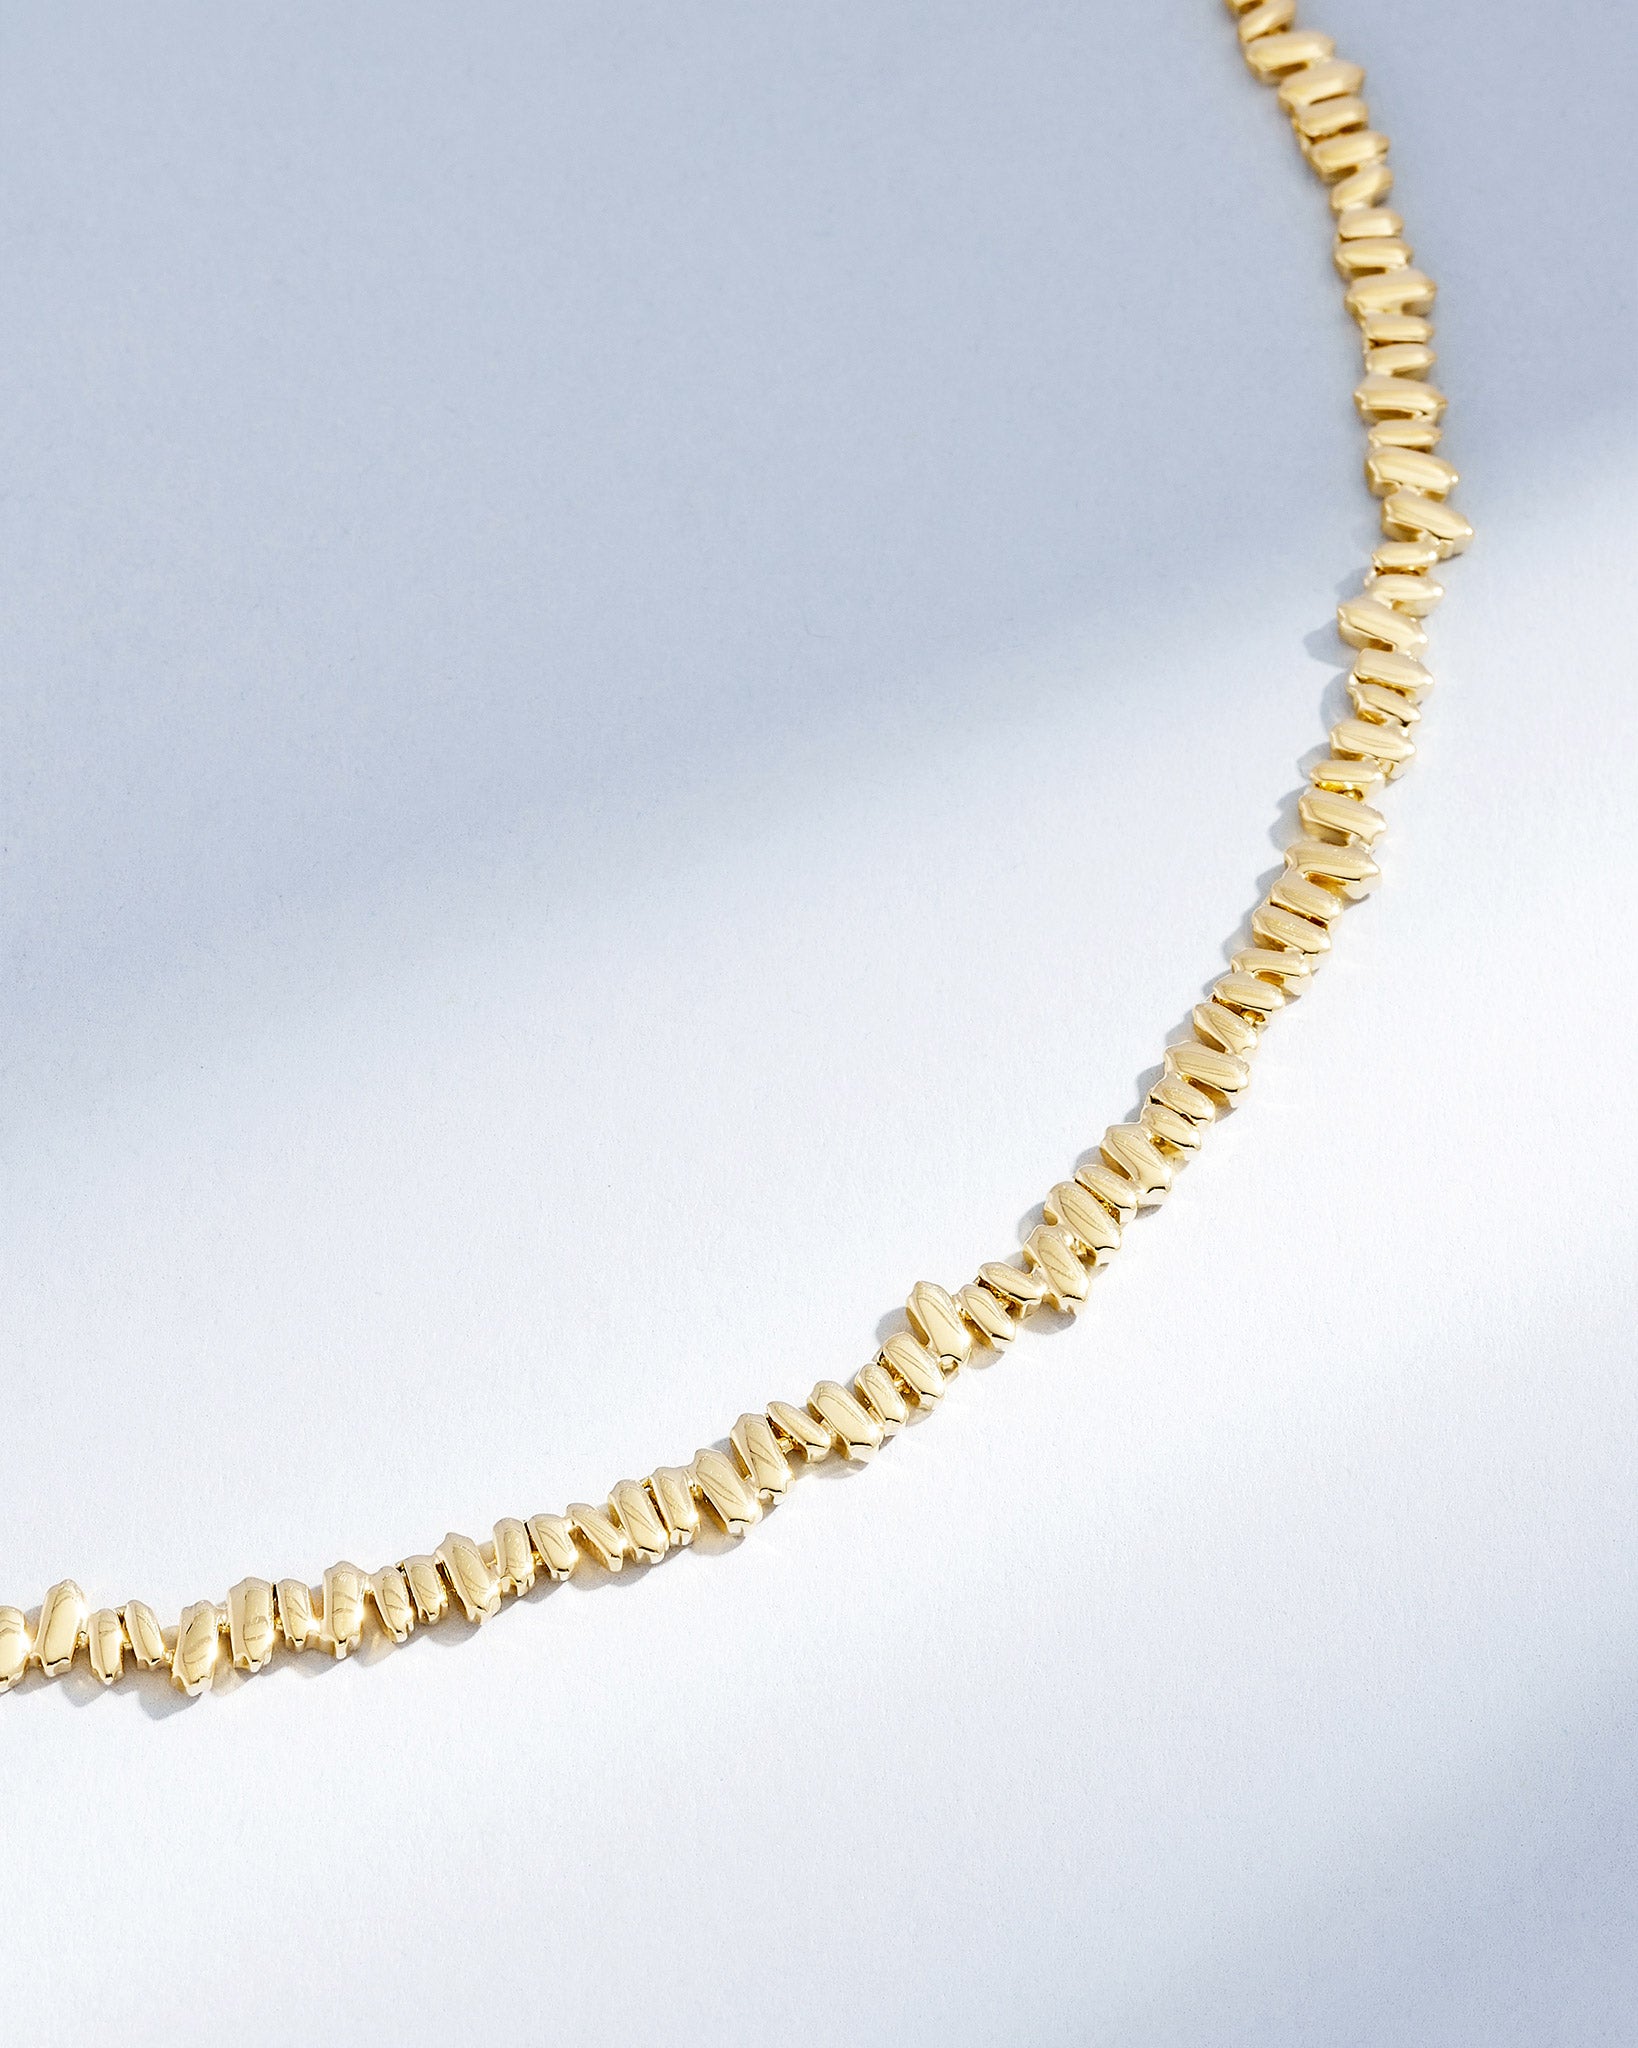 Suzanne Kalan Golden Tennis Necklace in 18k yellow gold